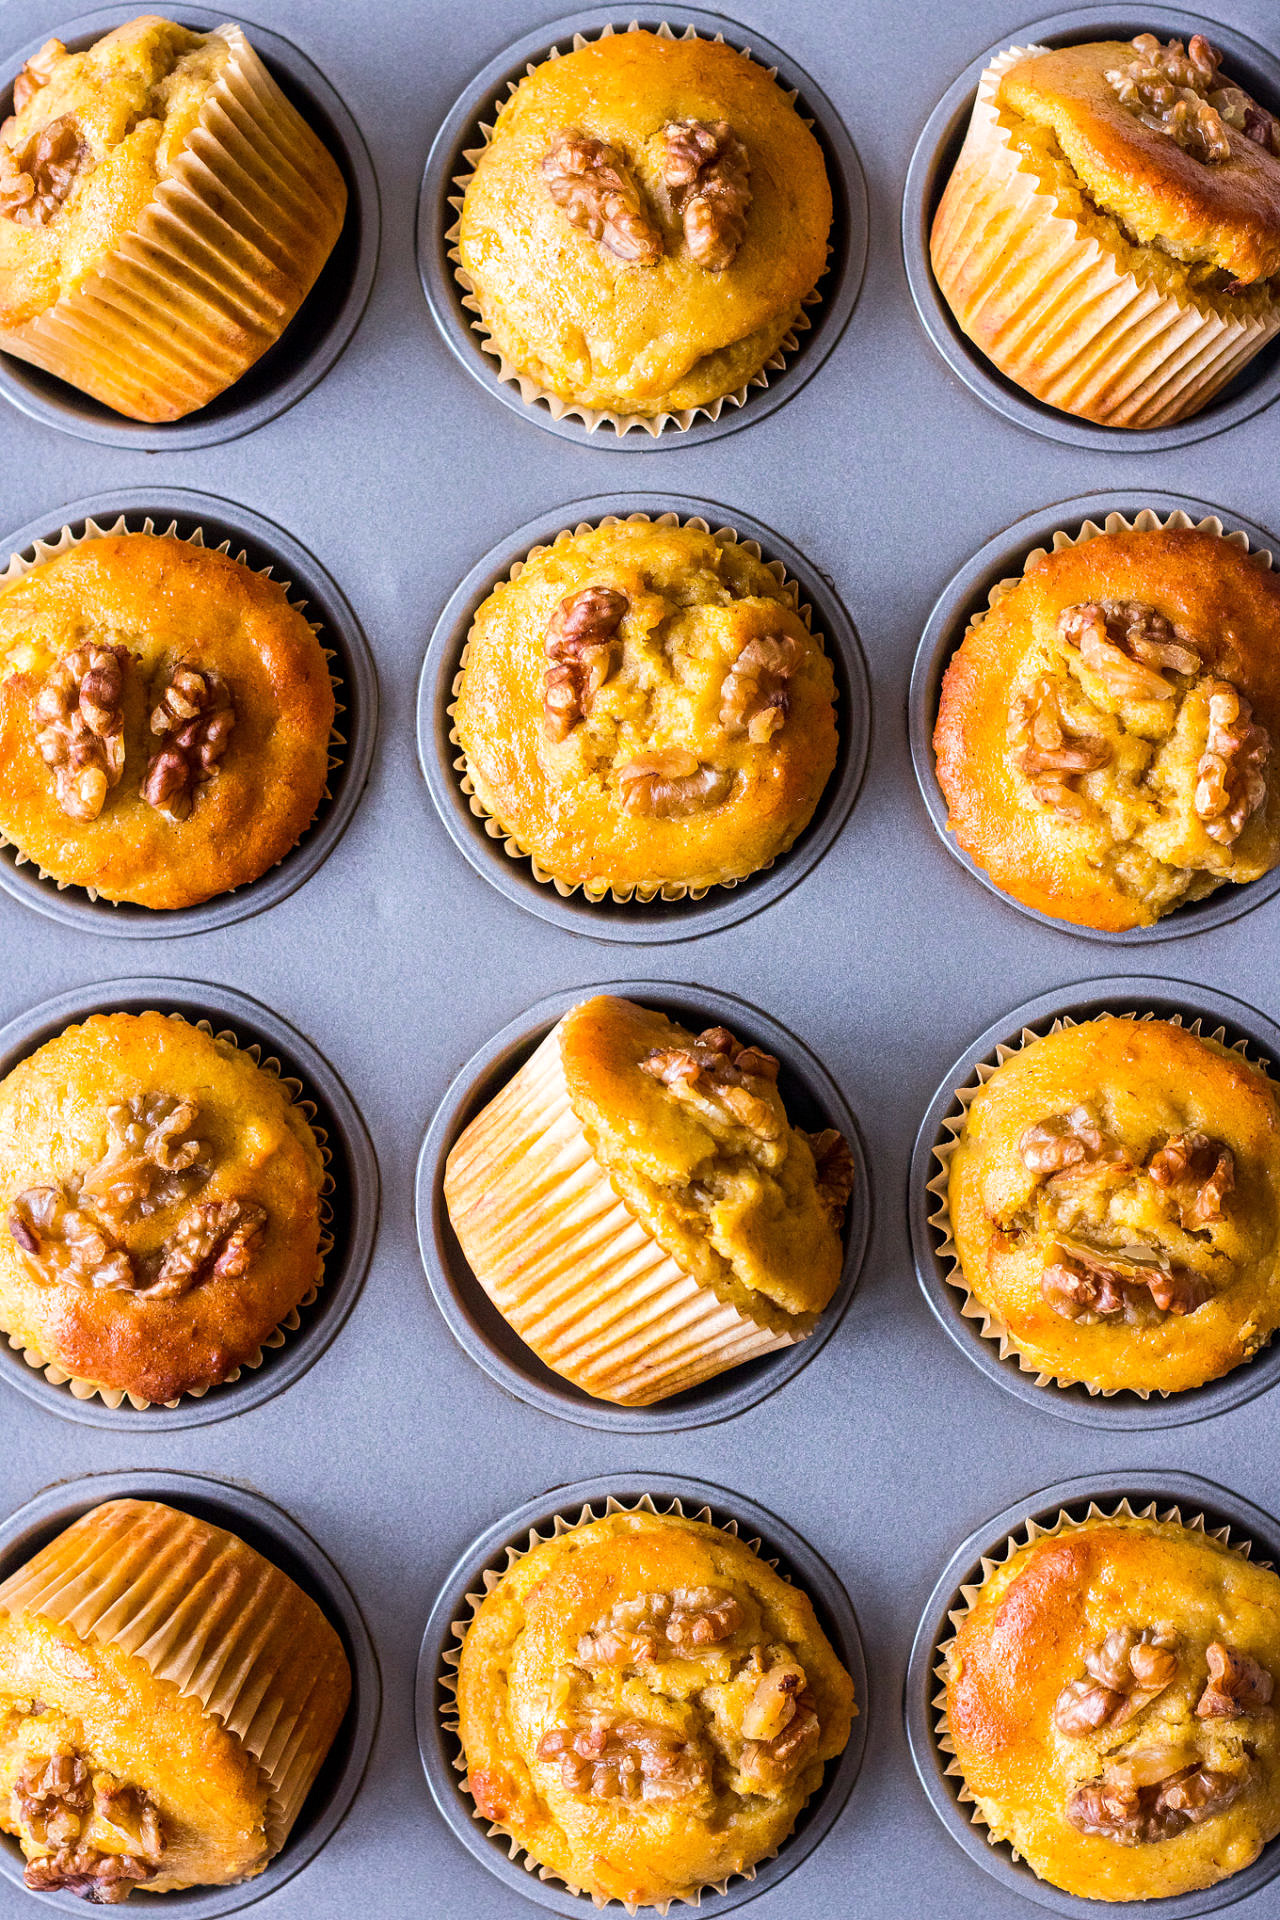 Dark metal muffin tray filled with healthy pumpkin, banana and walnut muffins